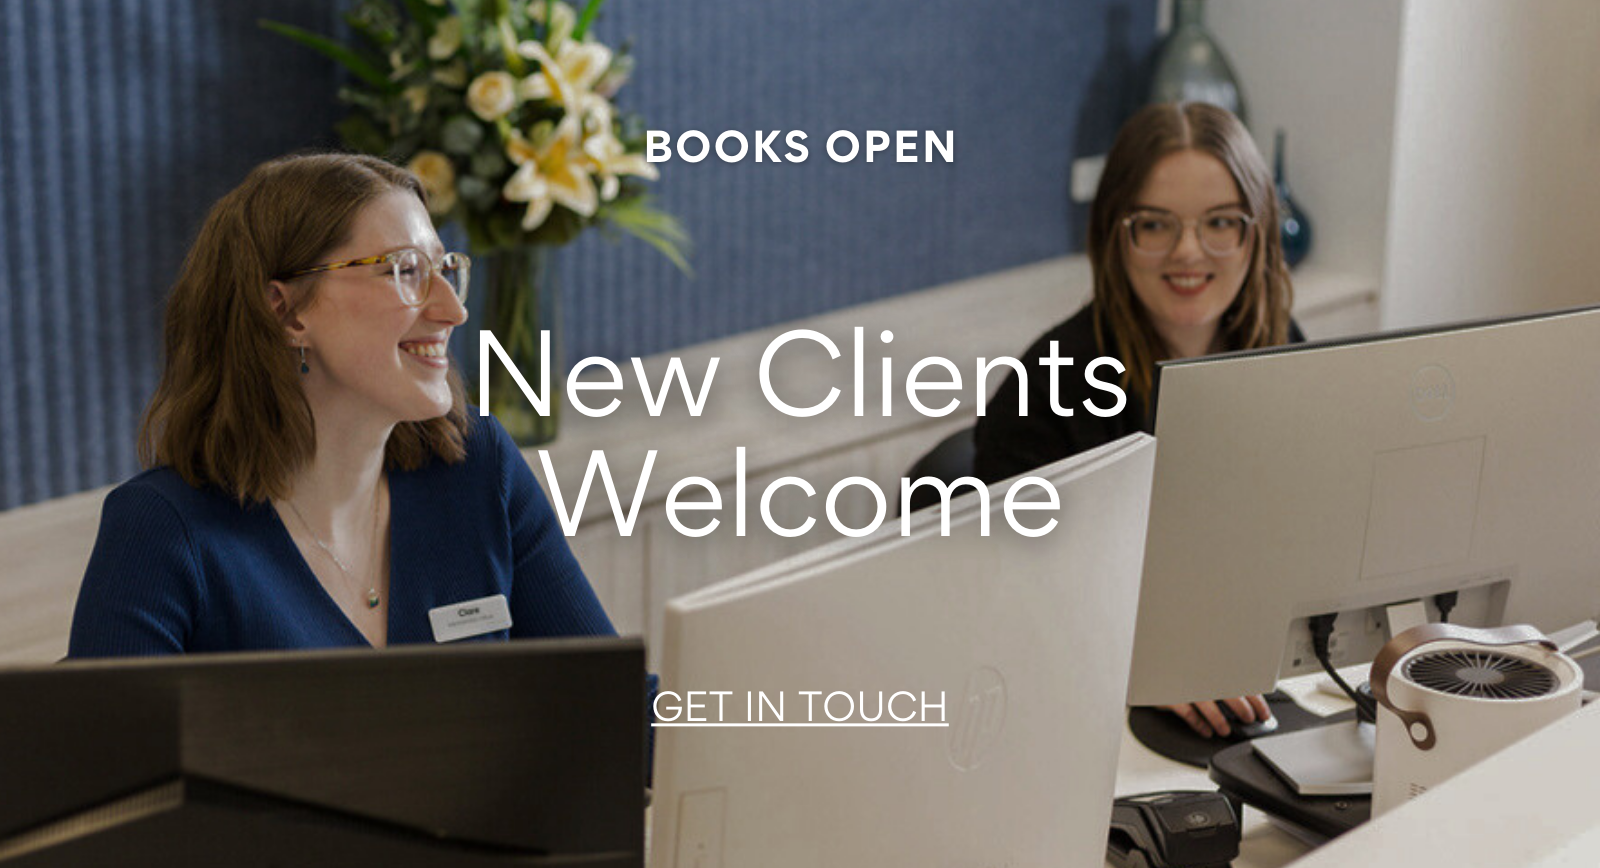 Books Open New Clients Welcome - Get in Touch